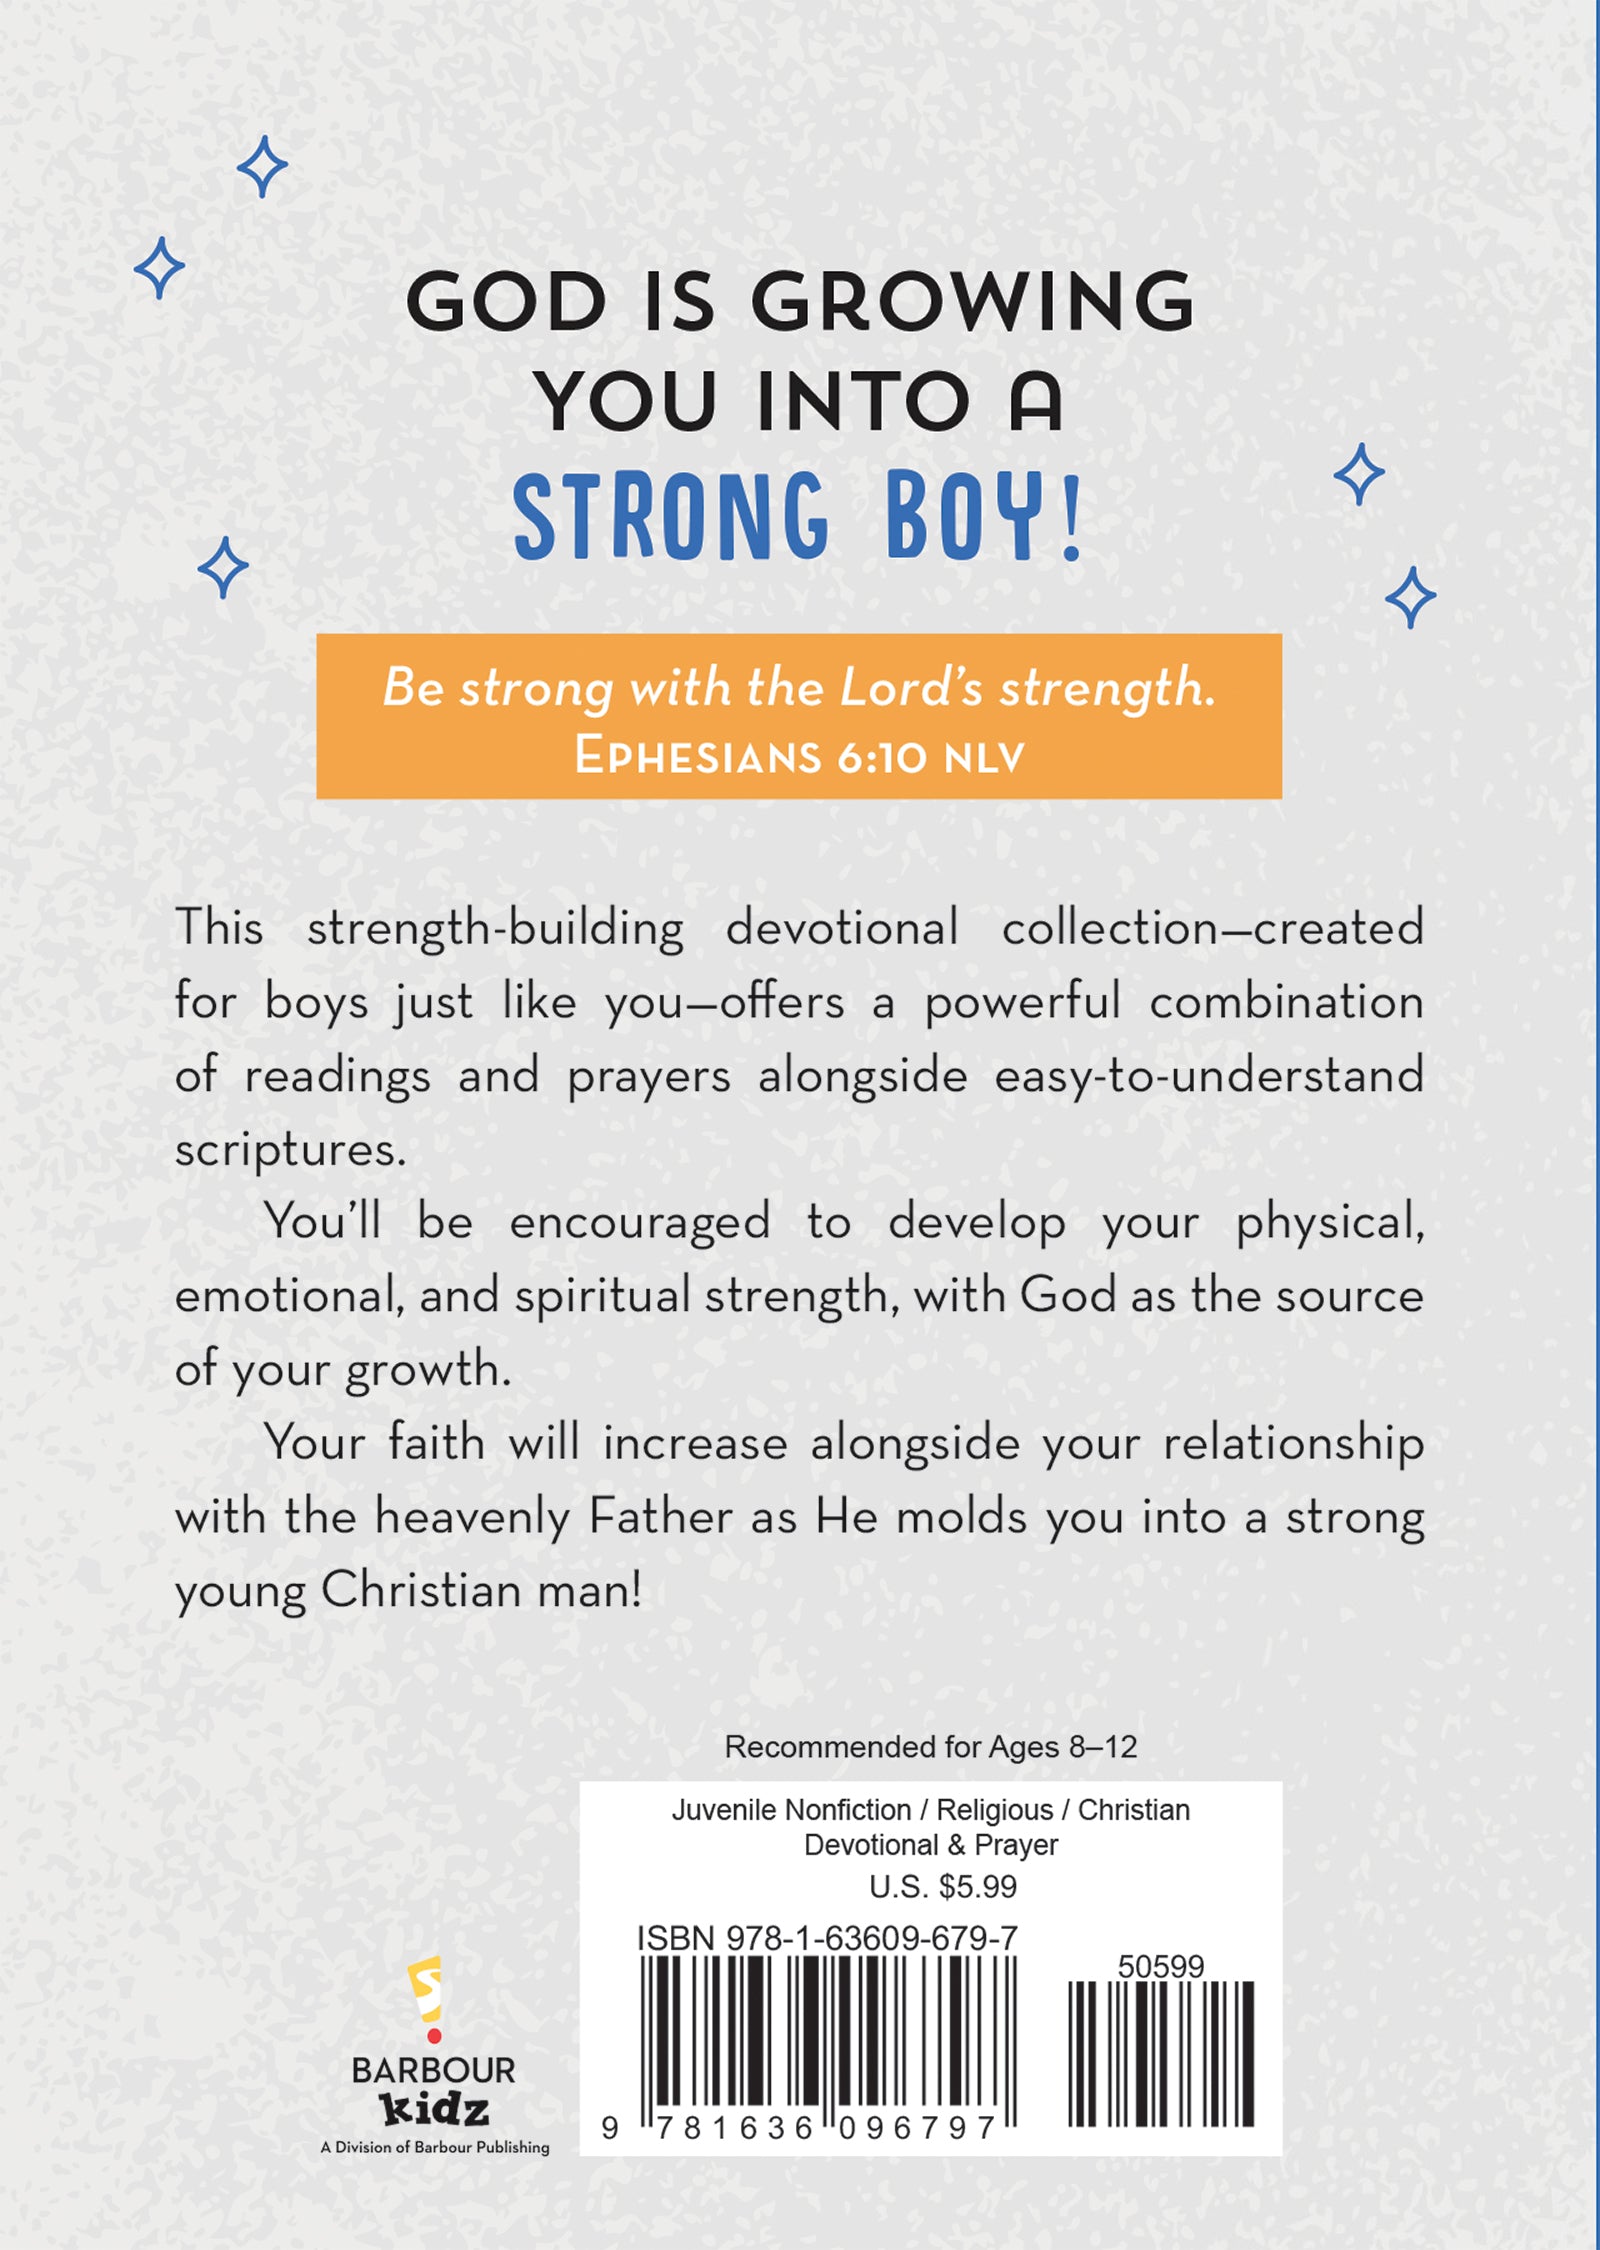 How God Grows a Strong Boy - The Christian Gift Company